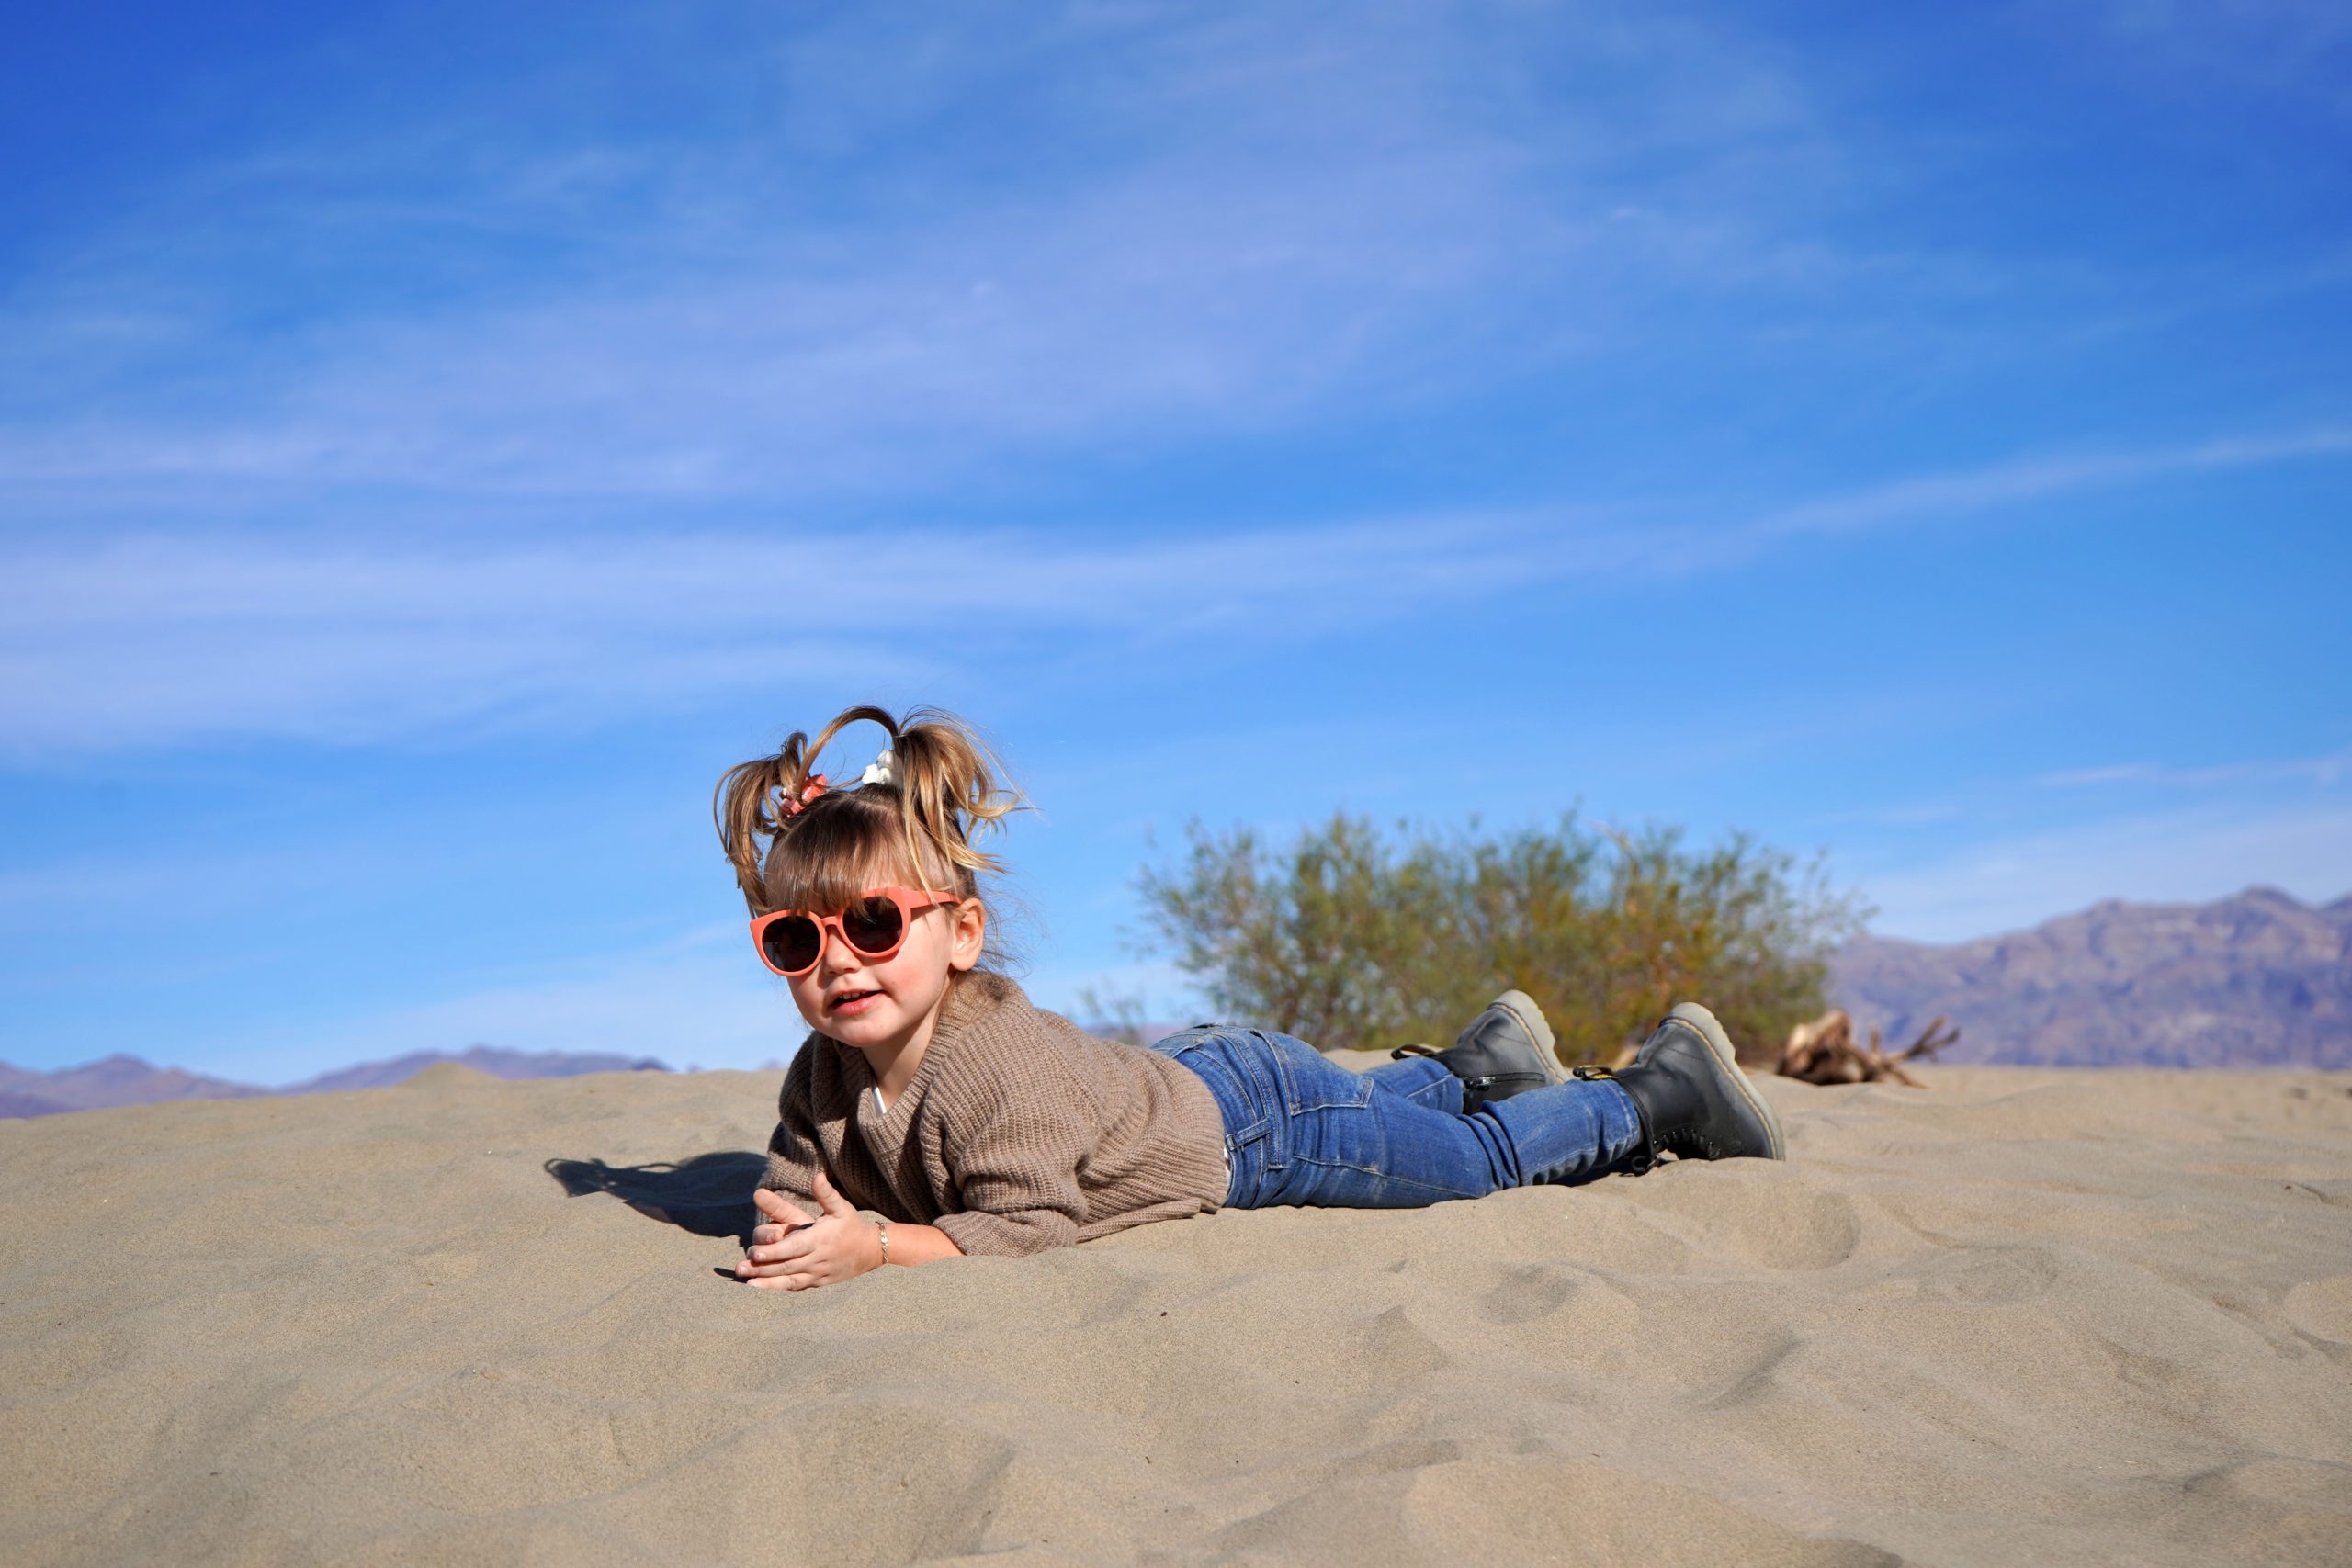 basking in her first sand dune experience | Travel Beauty